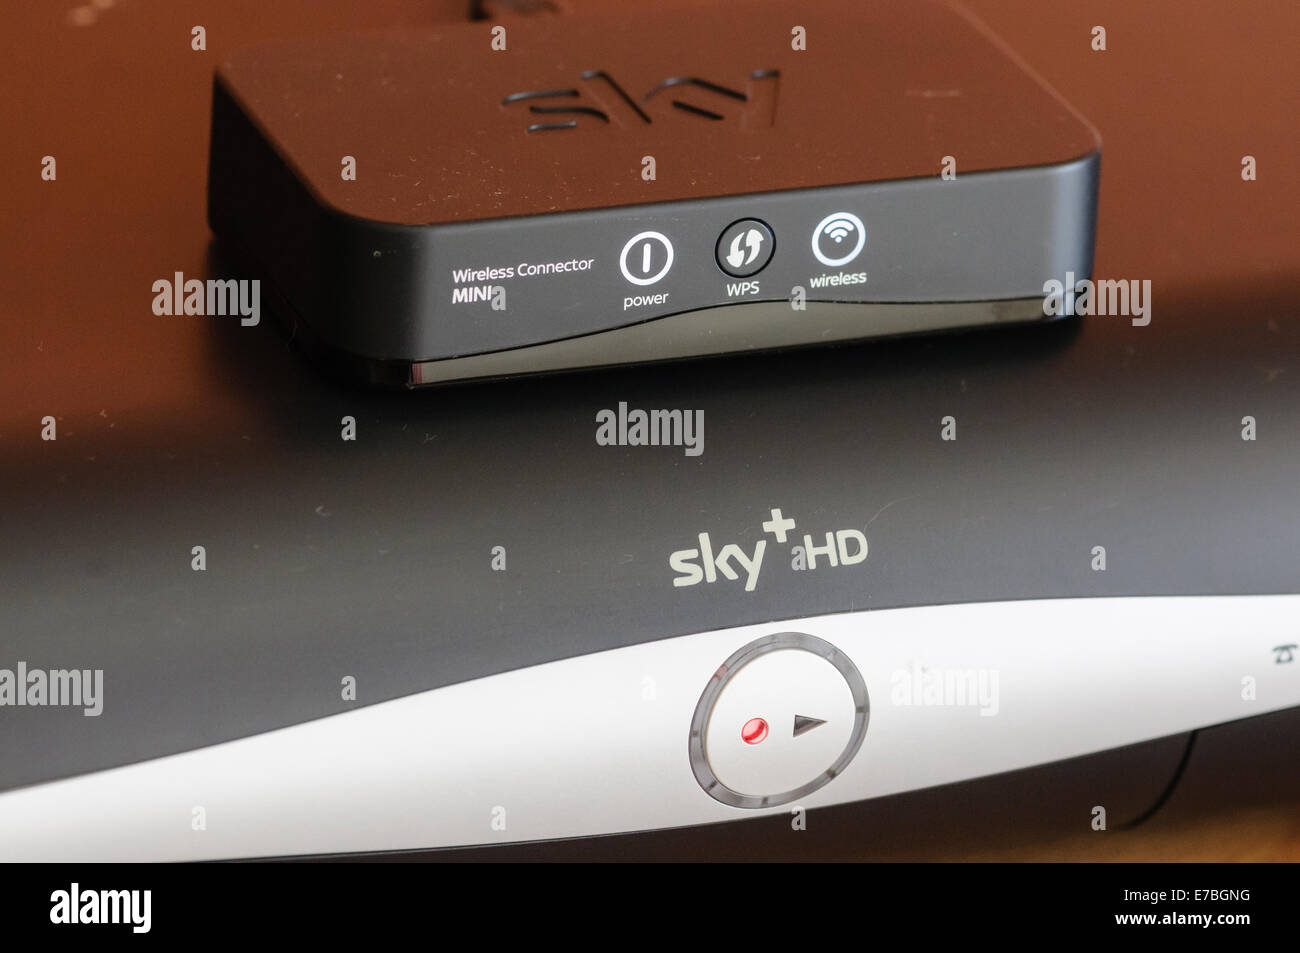 Sky+ HD box with a wifi wireless connector adapter to enable internet access Stock Photo